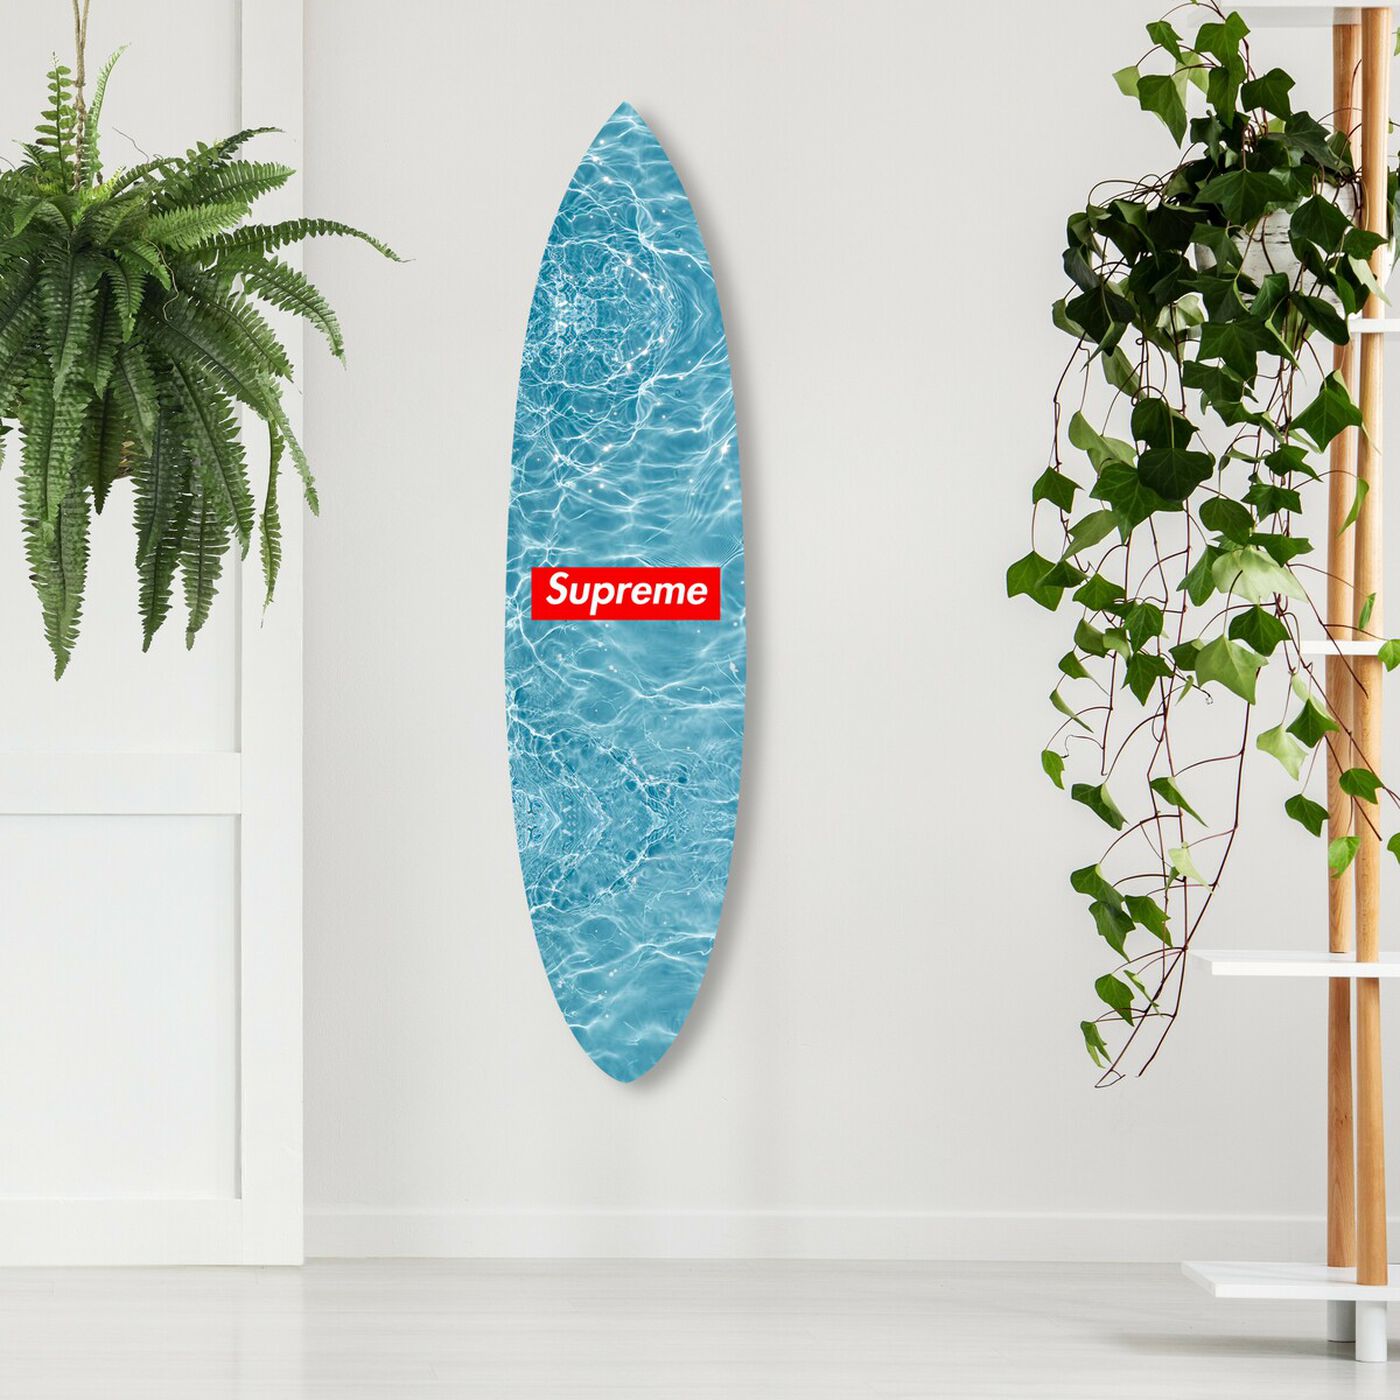 Order of Red Surfboard